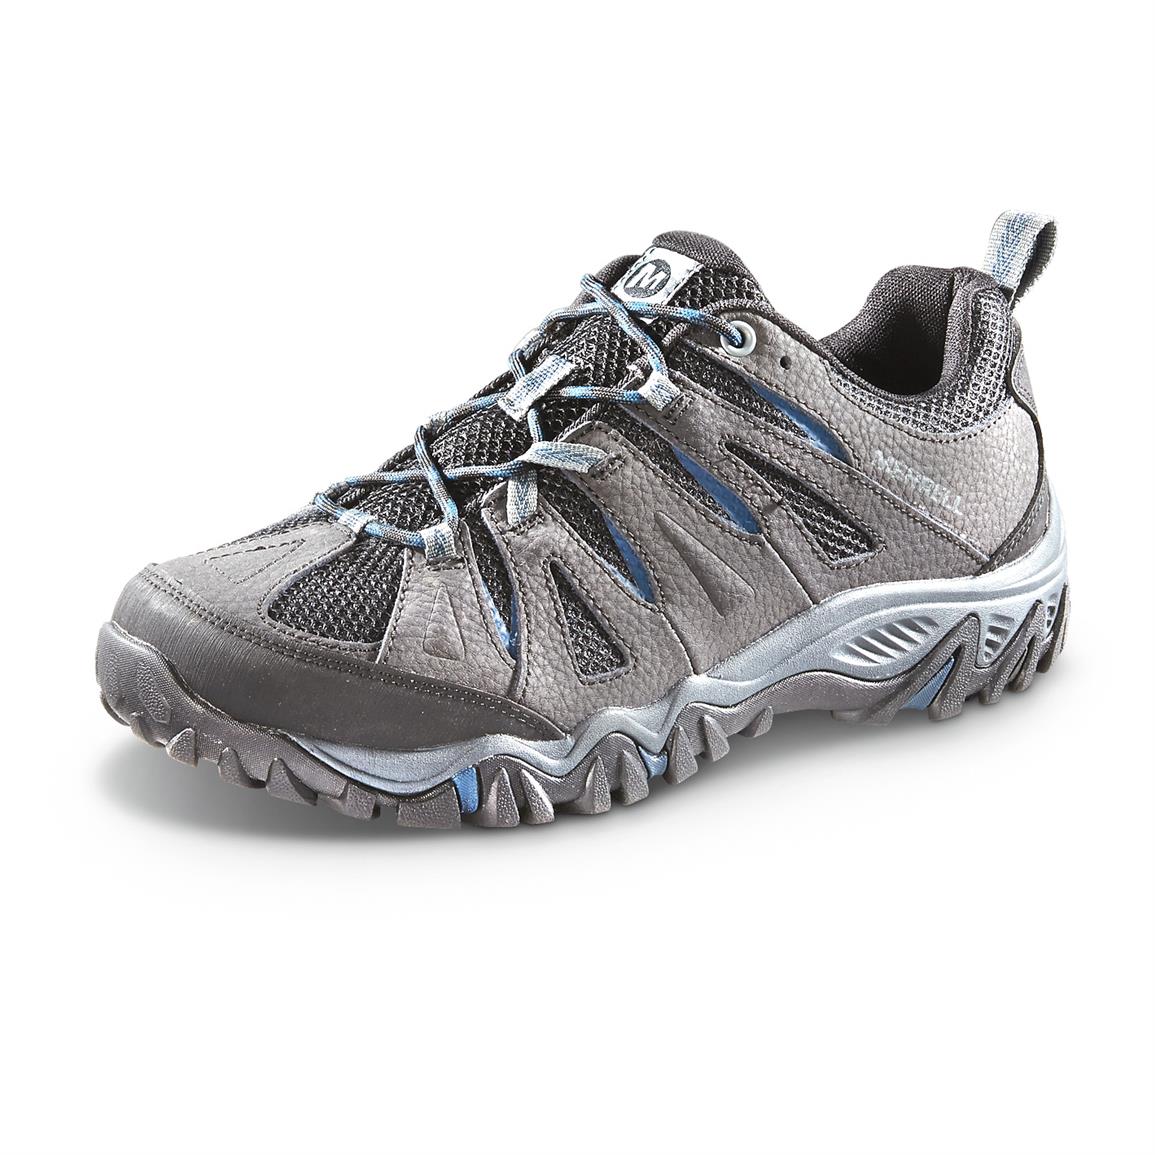 Merrell Mojave Hiking Boots - 641855, Hiking Boots & Shoes at Sportsman ...